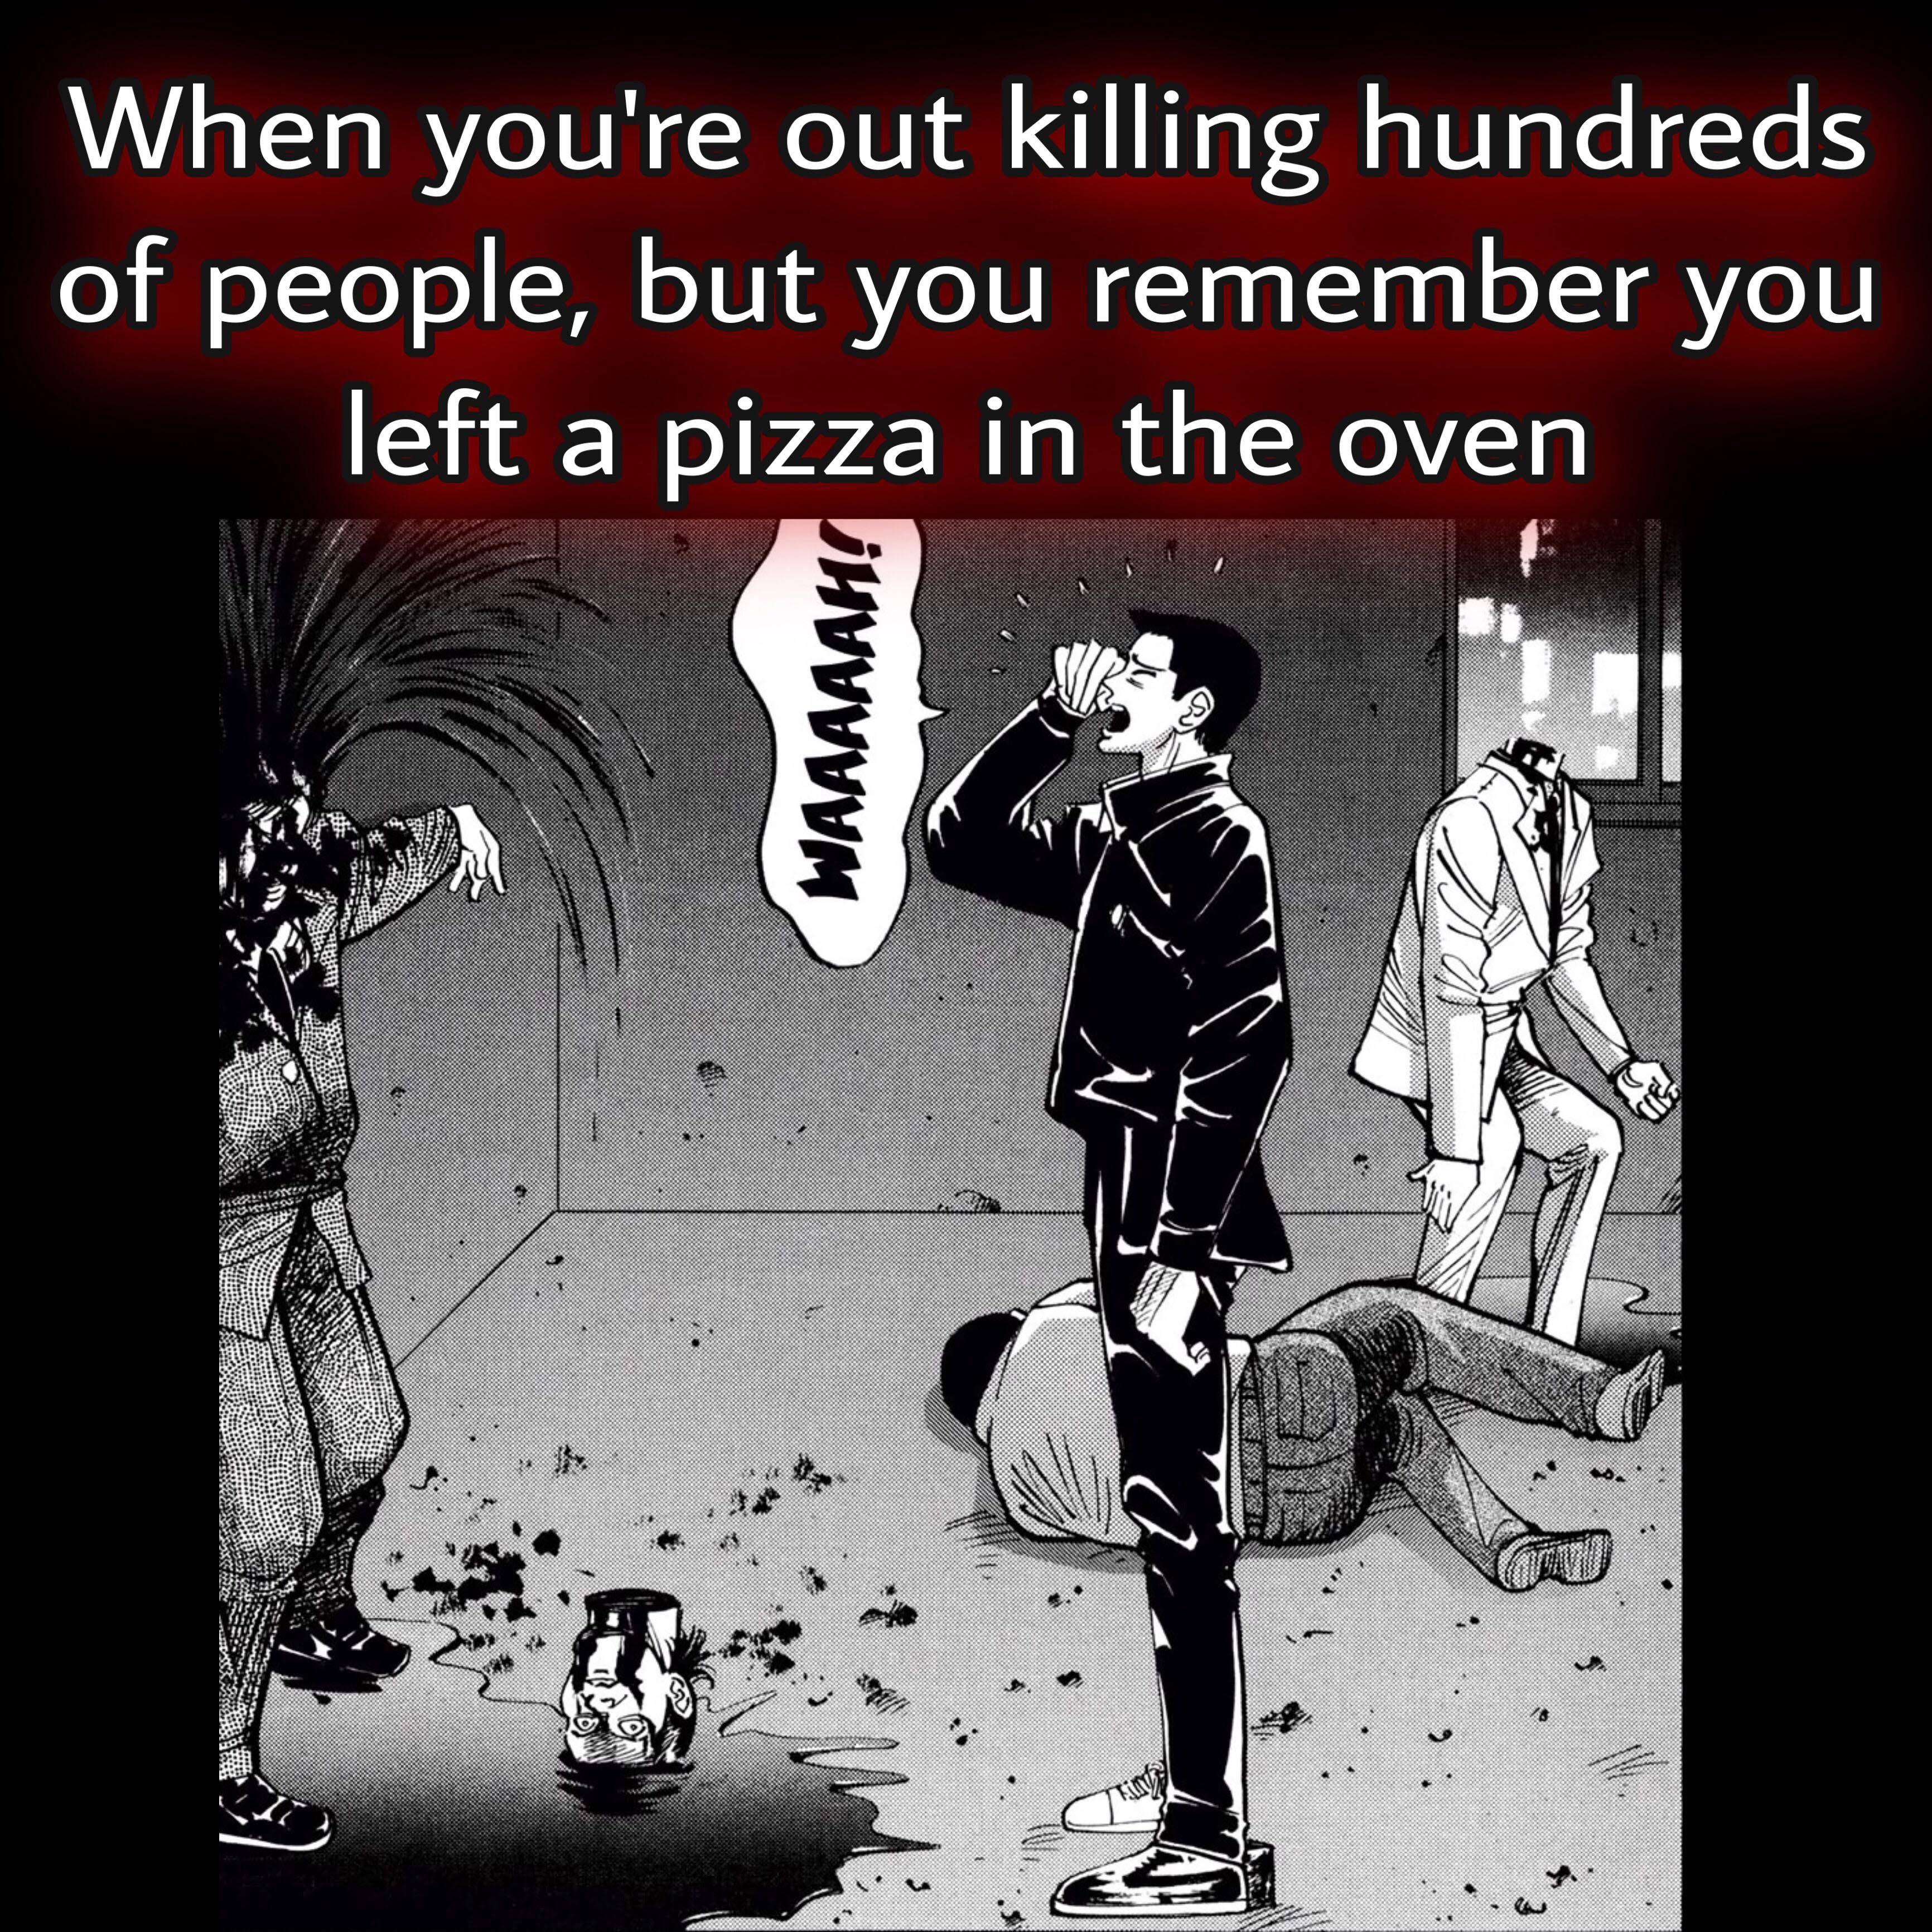 dank memes - cartoon - When you're out killing hundreds of people, but you remember you left a pizza in the oven Waaaaah!